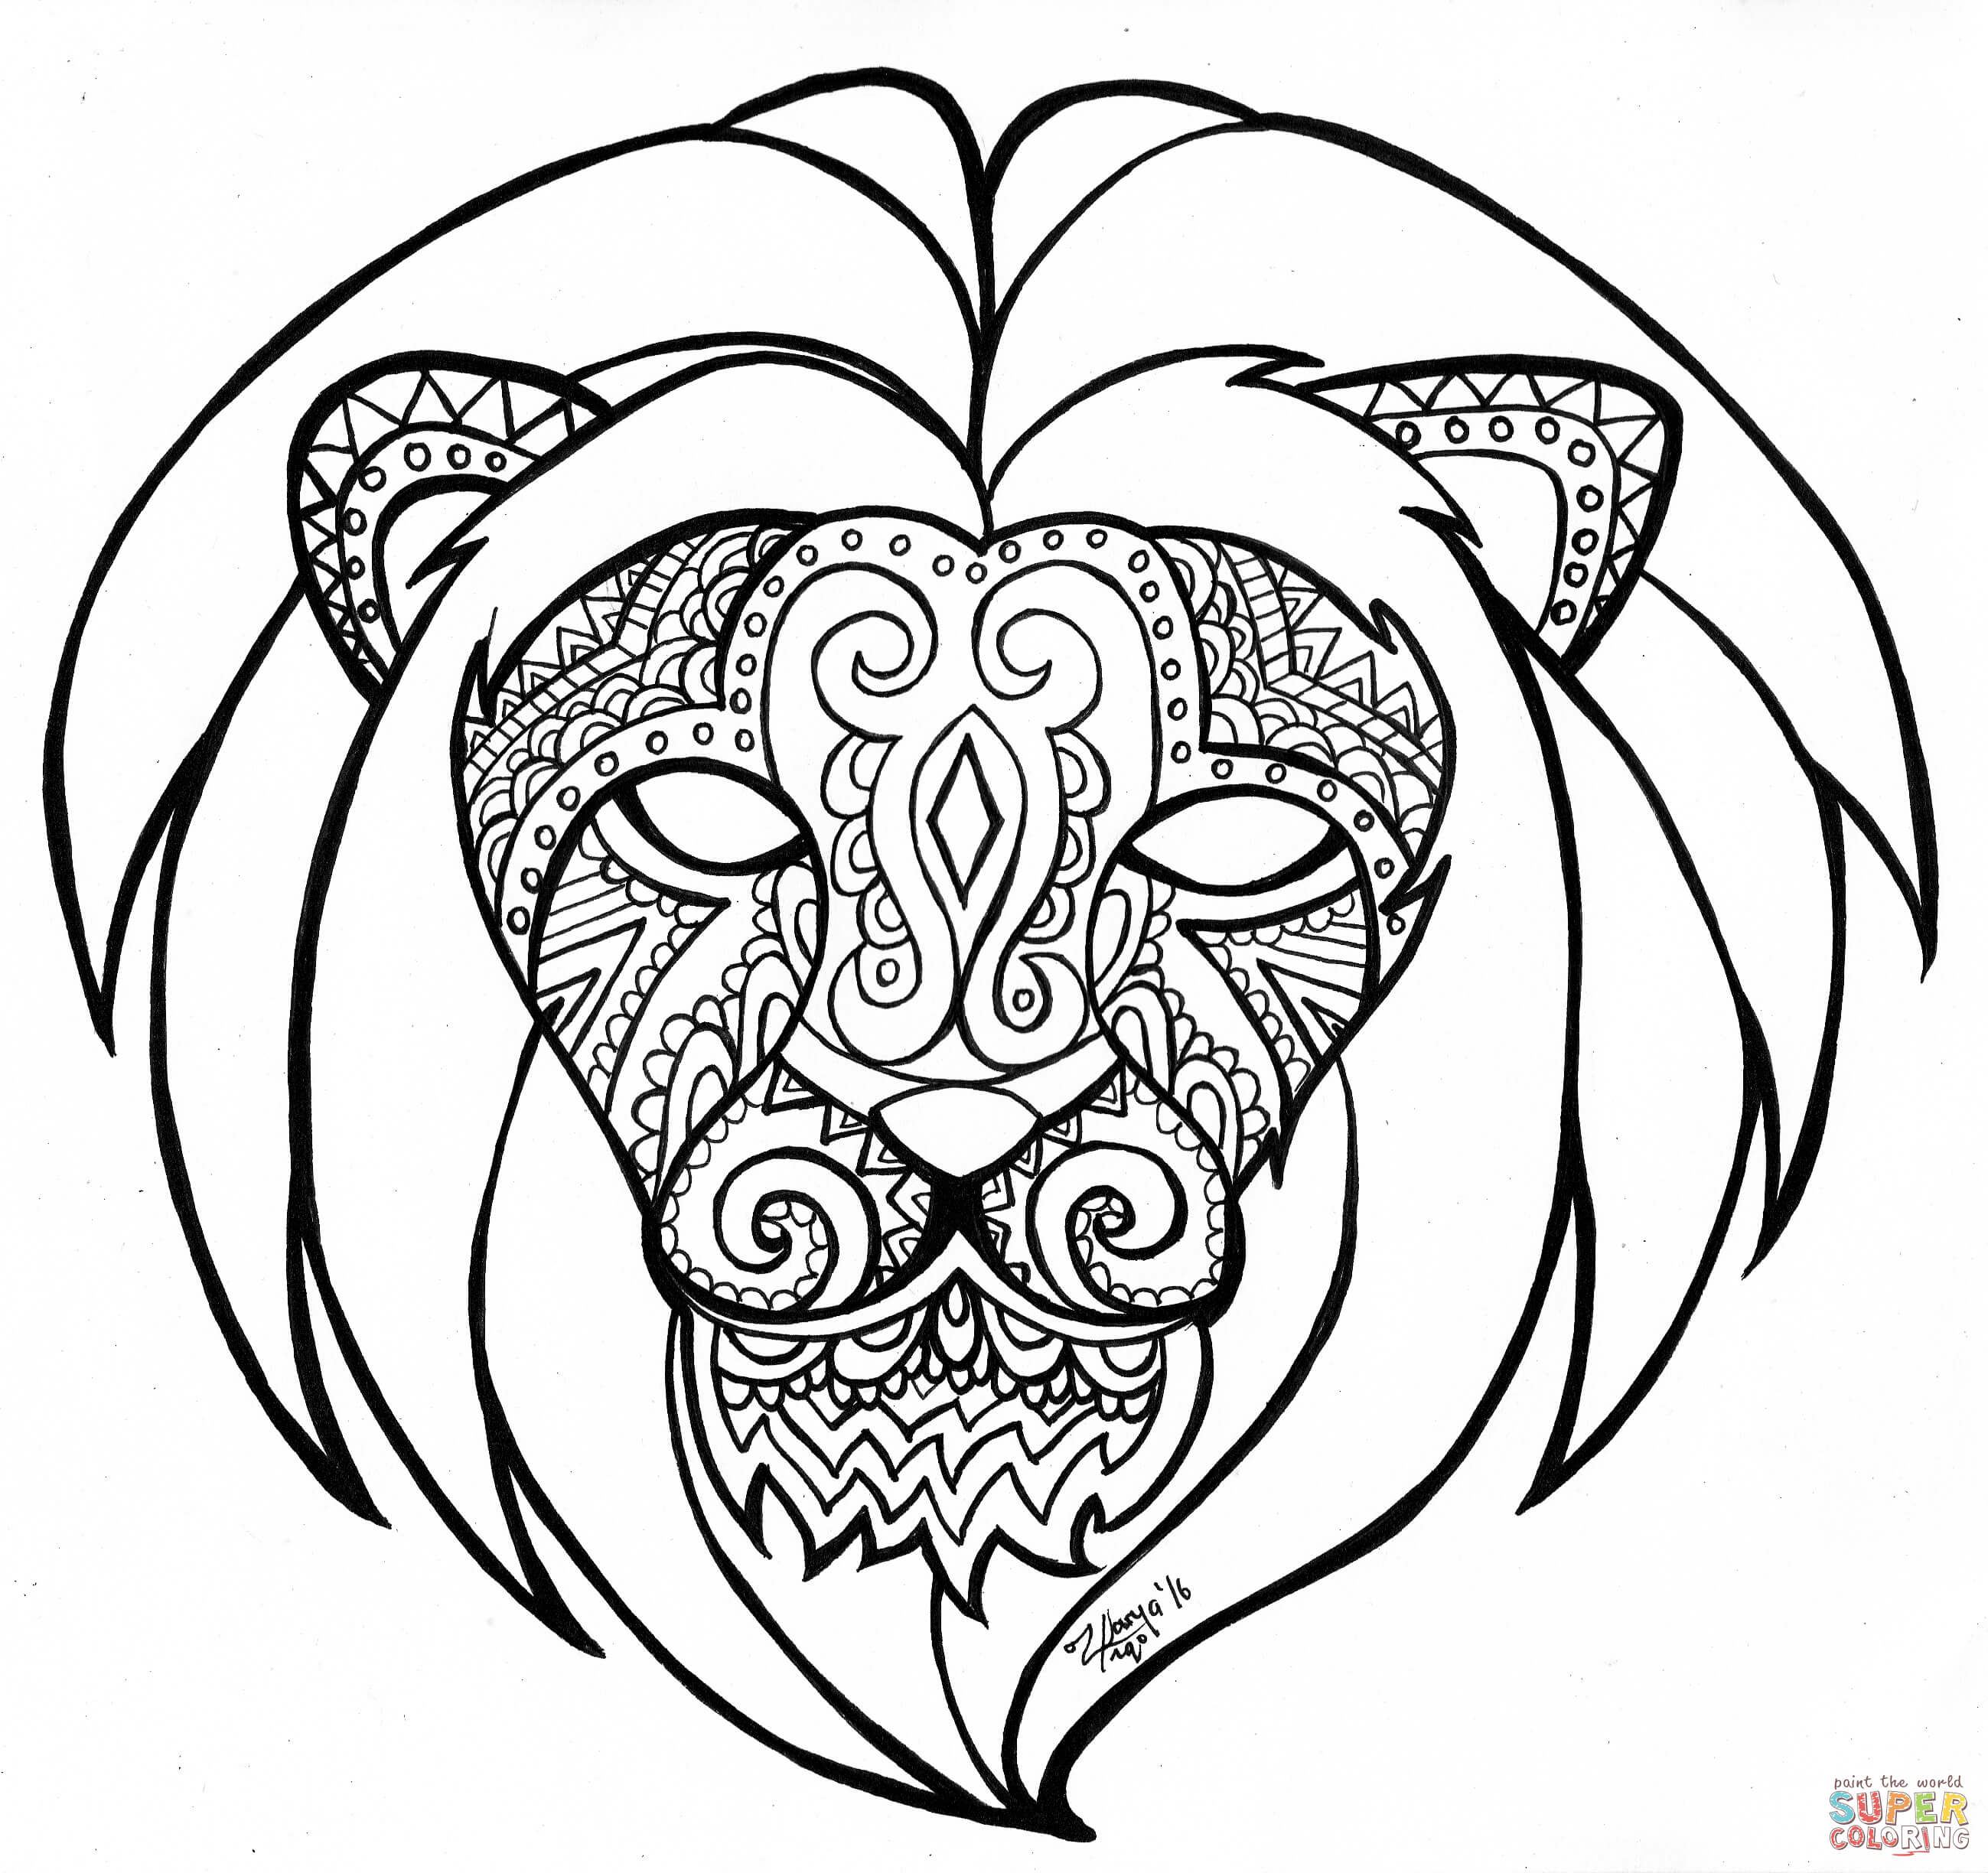 Decorative lion face coloring page free printable coloring pages